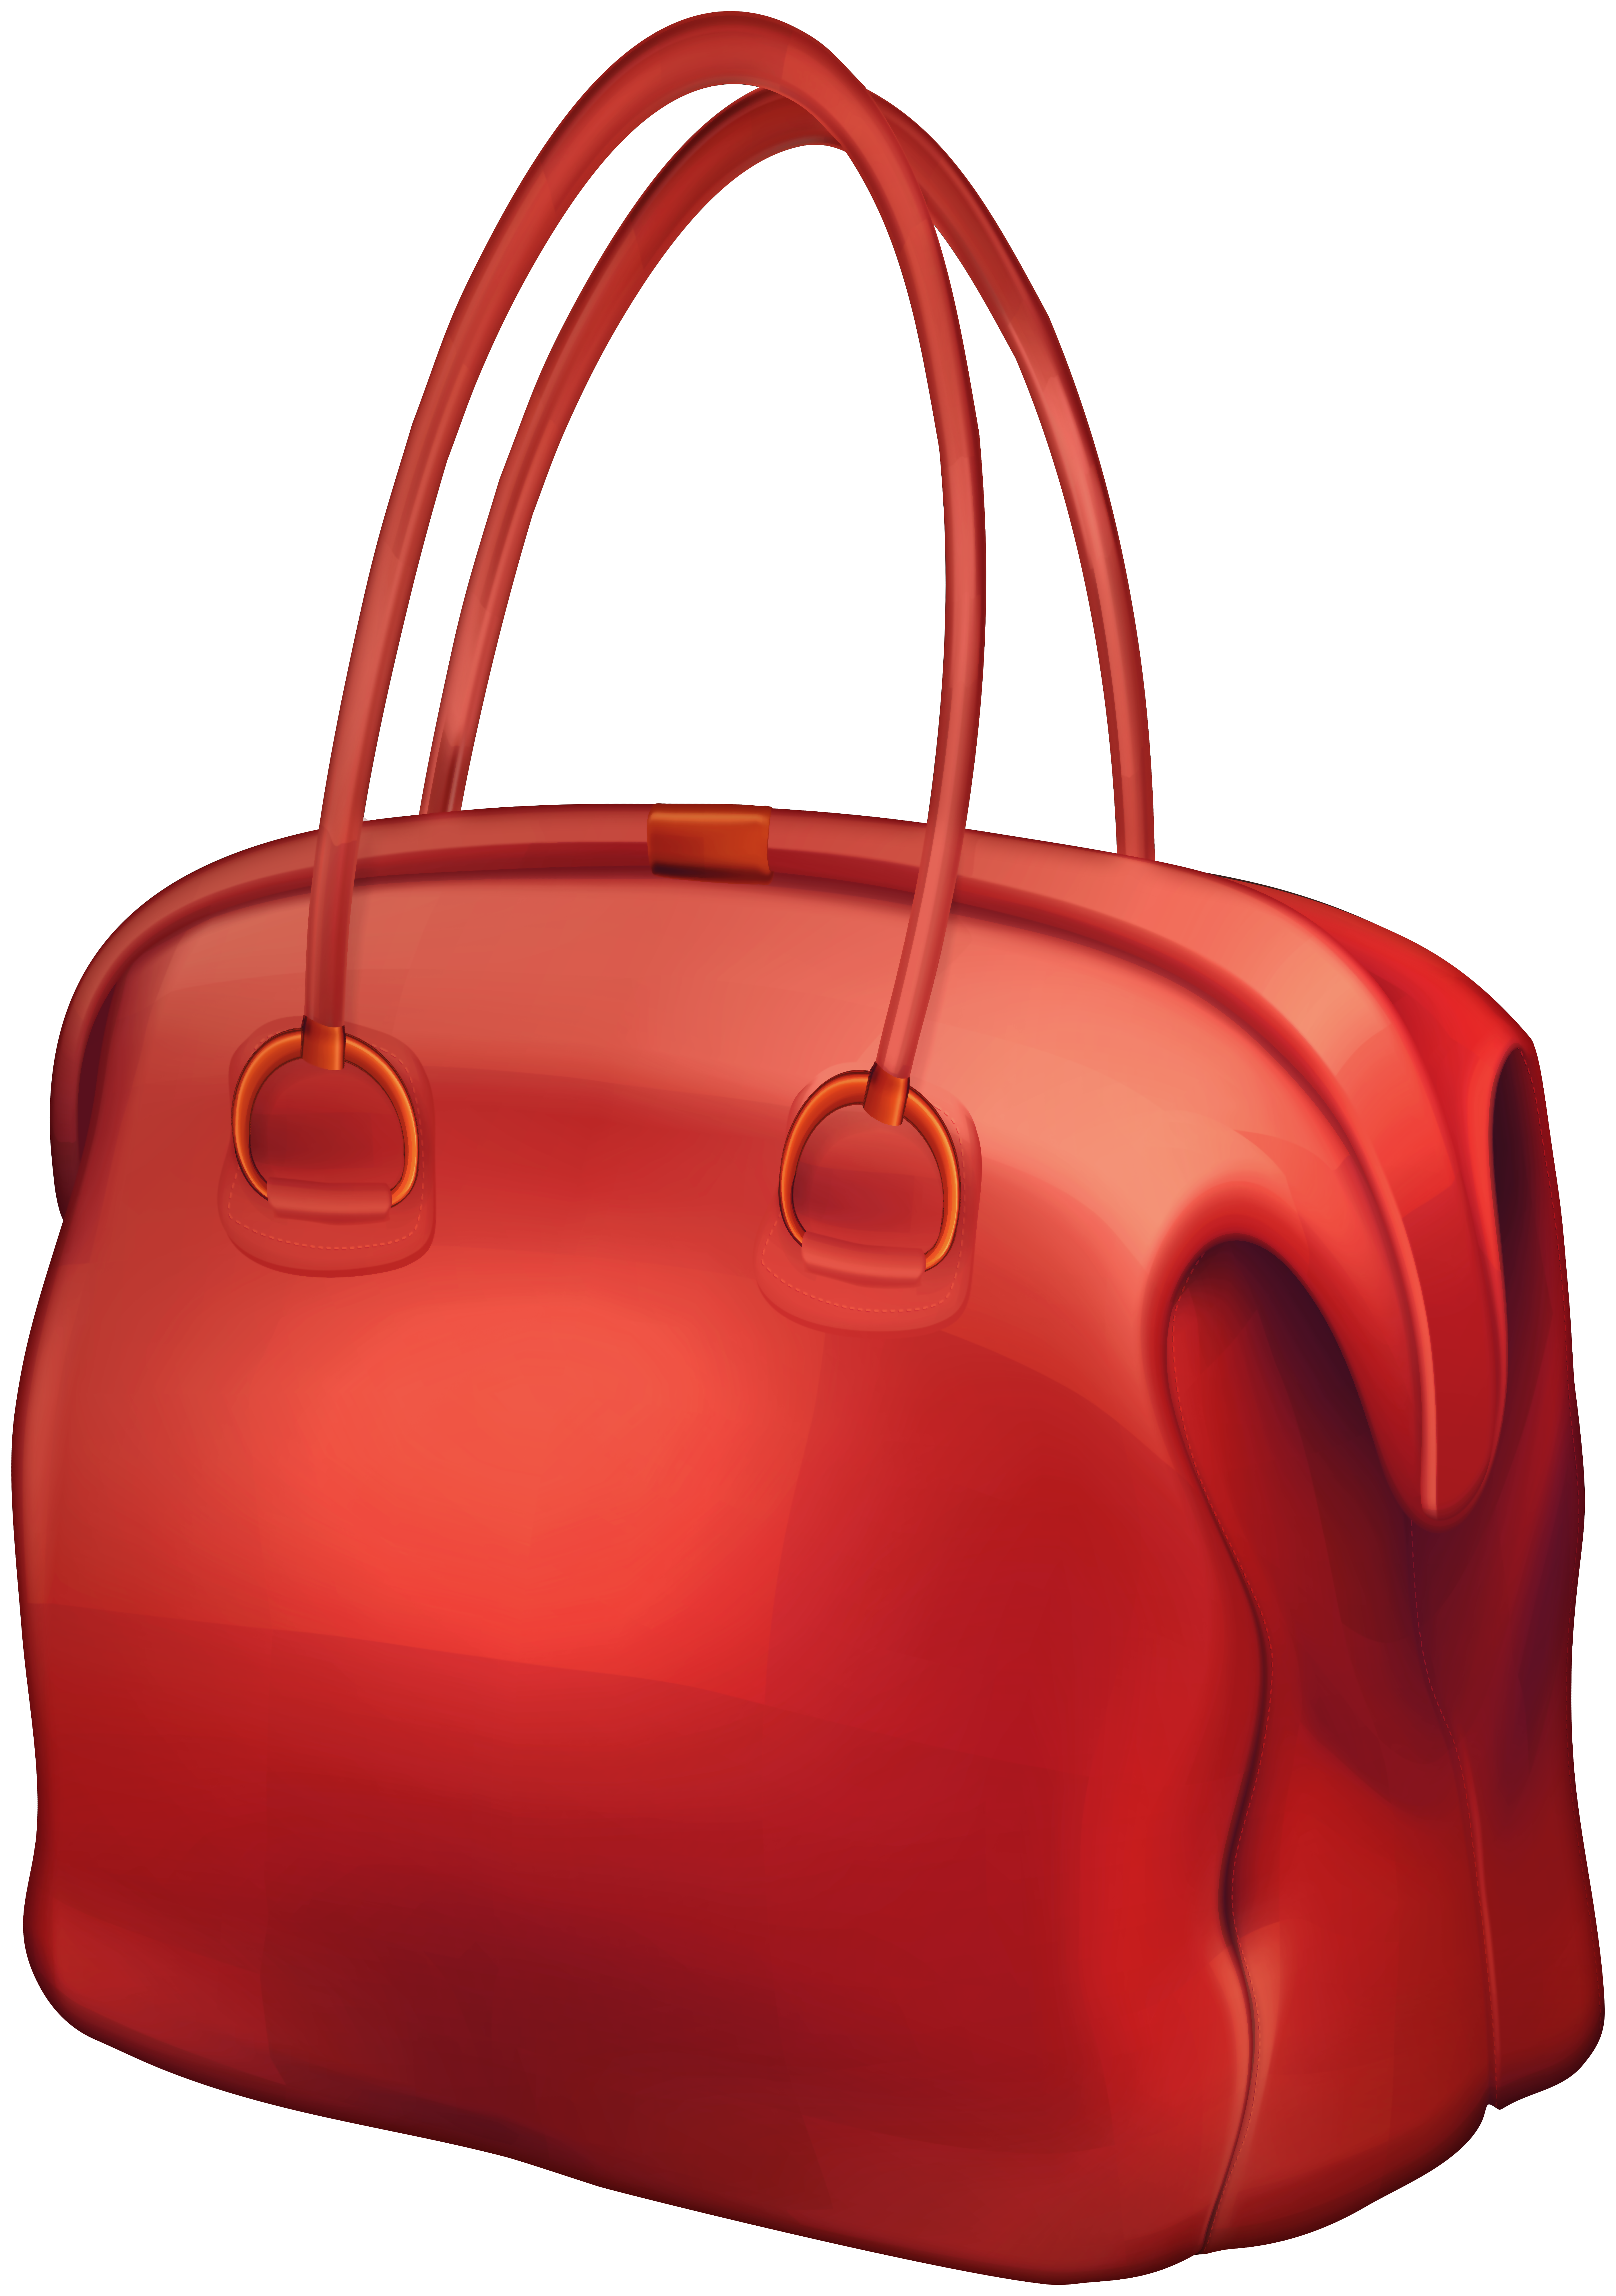 This PNG Image: "Red Bag PNG Clip Art" is part of "Bag PNG&q...